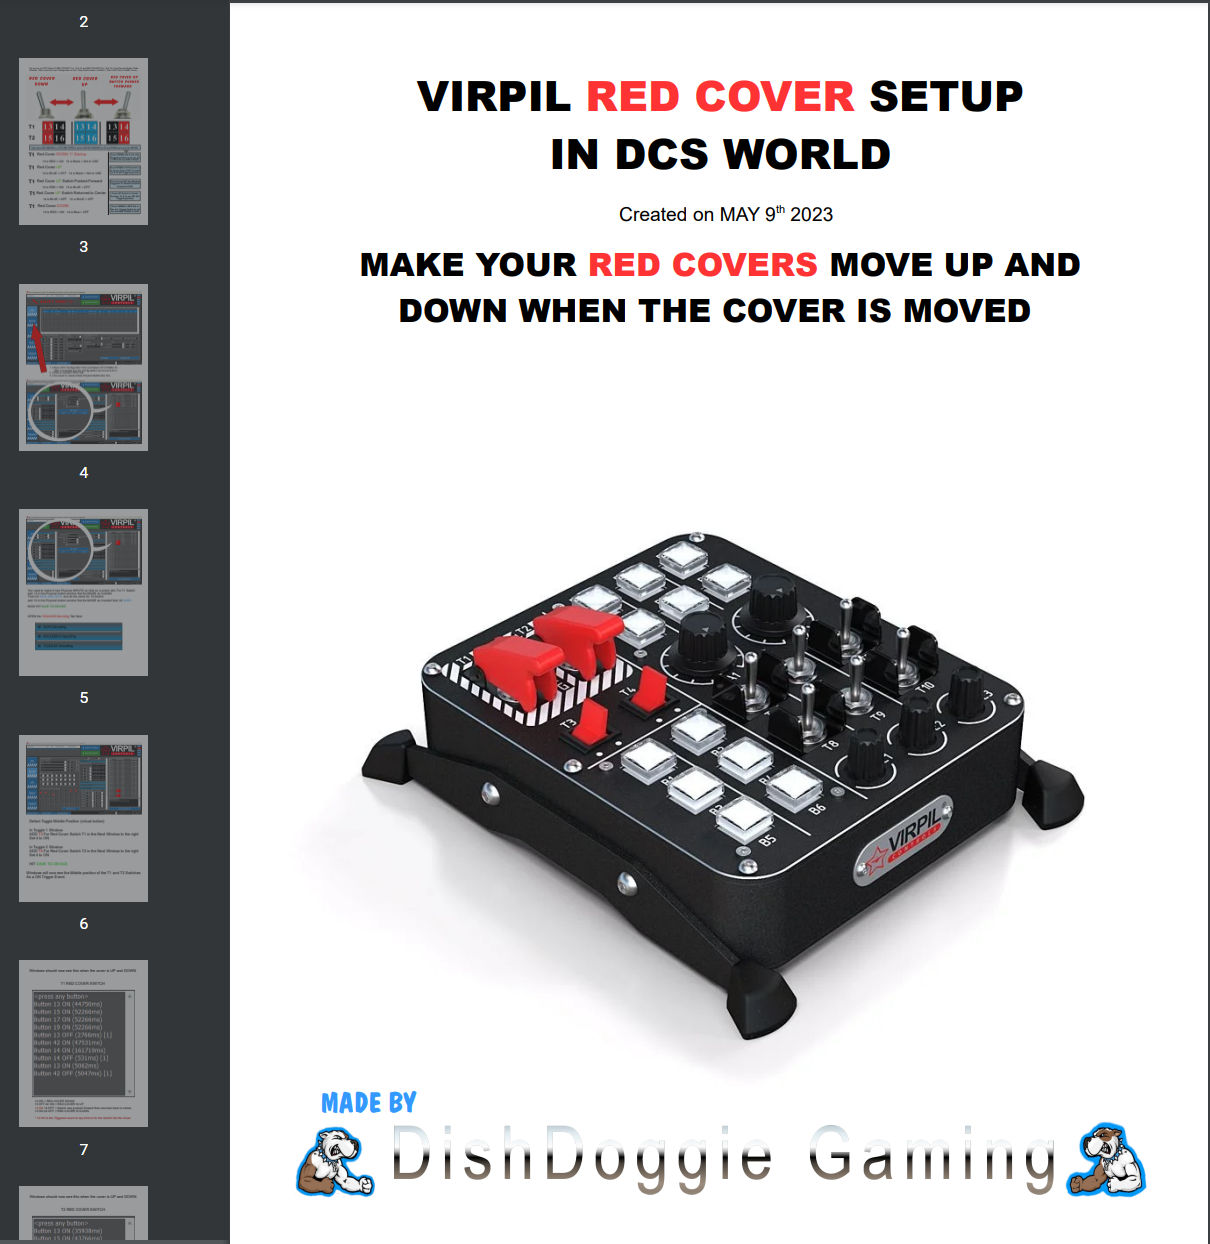 Virpil Help Tutorial for RED COVER 3 Way Switch - VIRPIL Controls